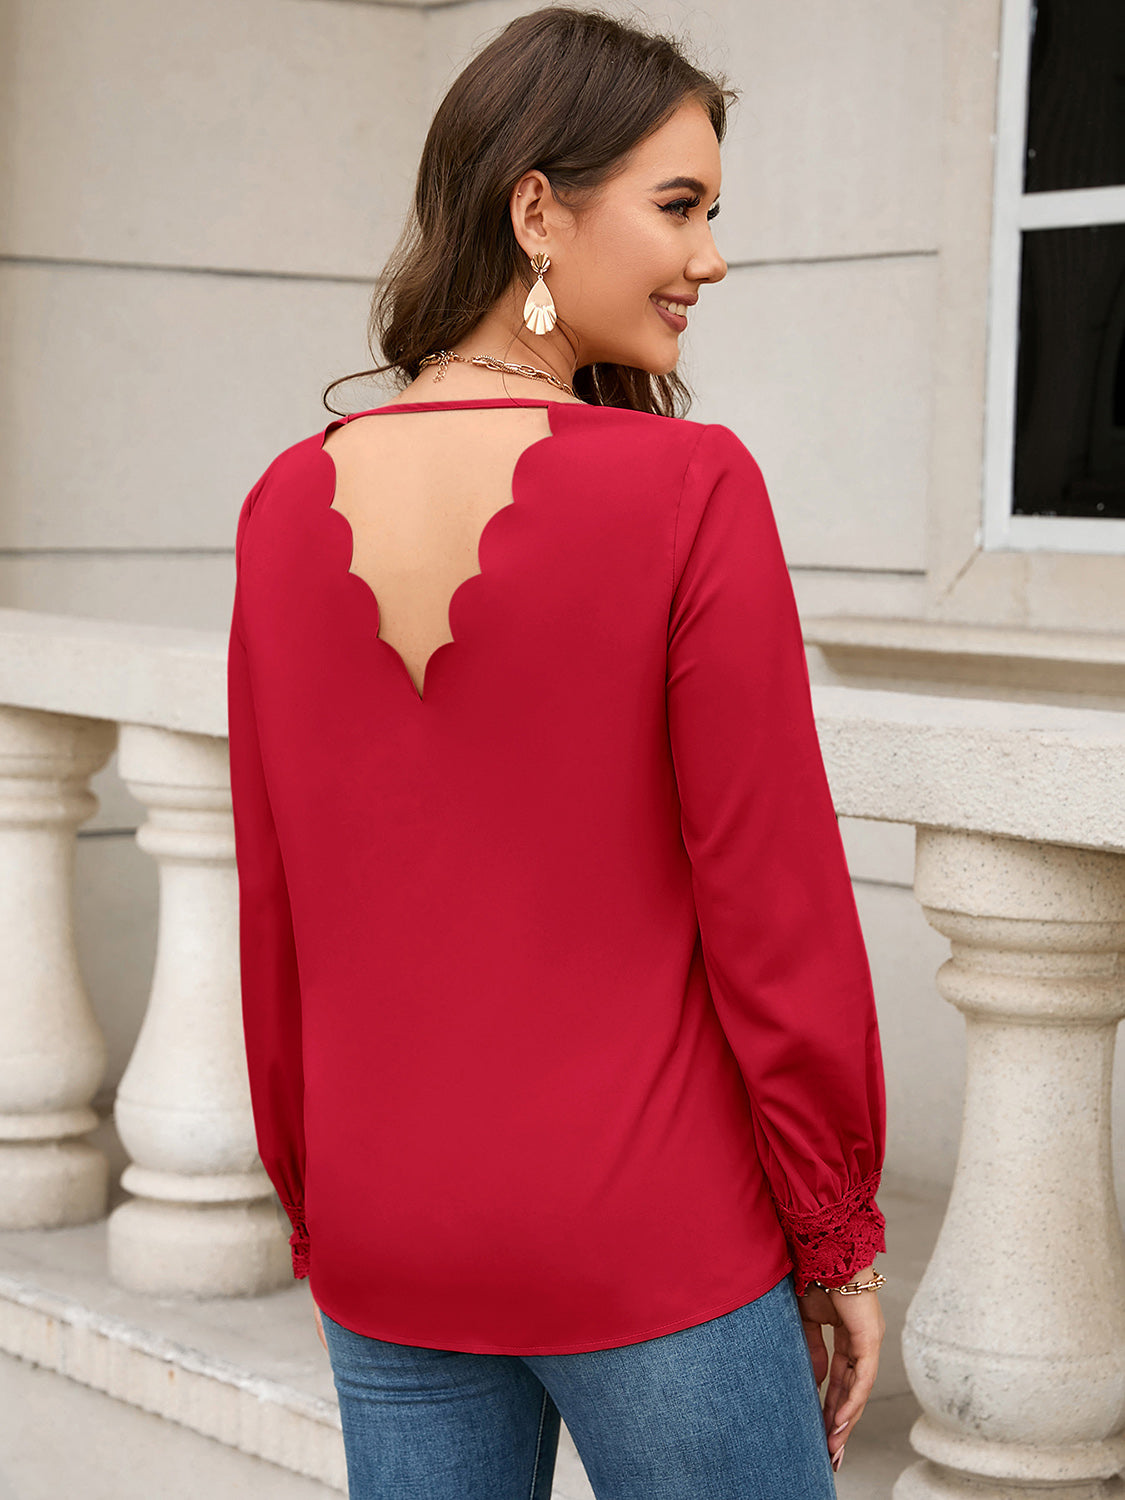 V-Neck Long Sleeve Blouse - Women’s Clothing & Accessories - Shirts & Tops - 5 - 2024